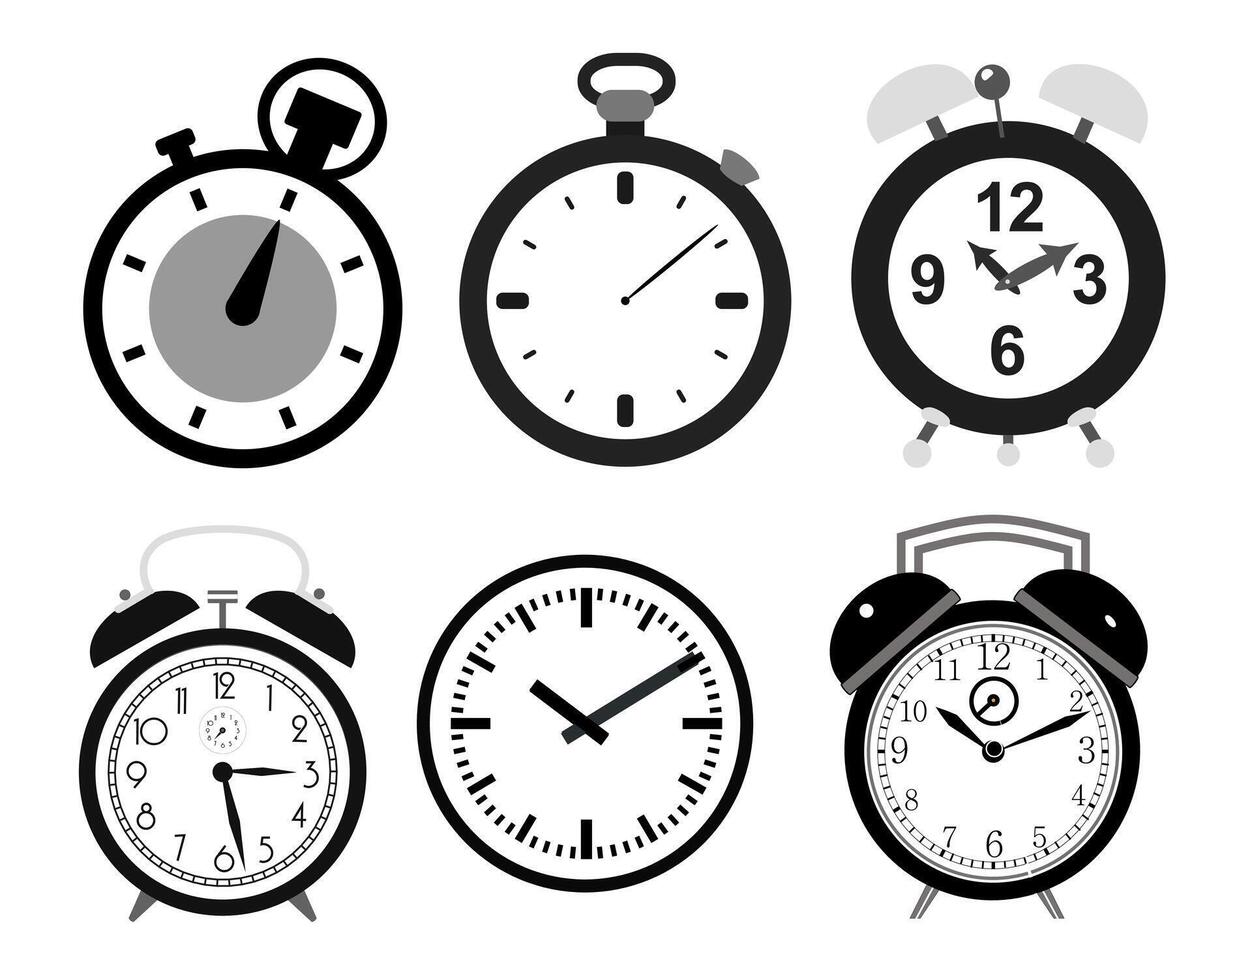 Set Collections of Clock, Stopwatch, and Timers. Black White Clock Timers Illustration. Vector Image.